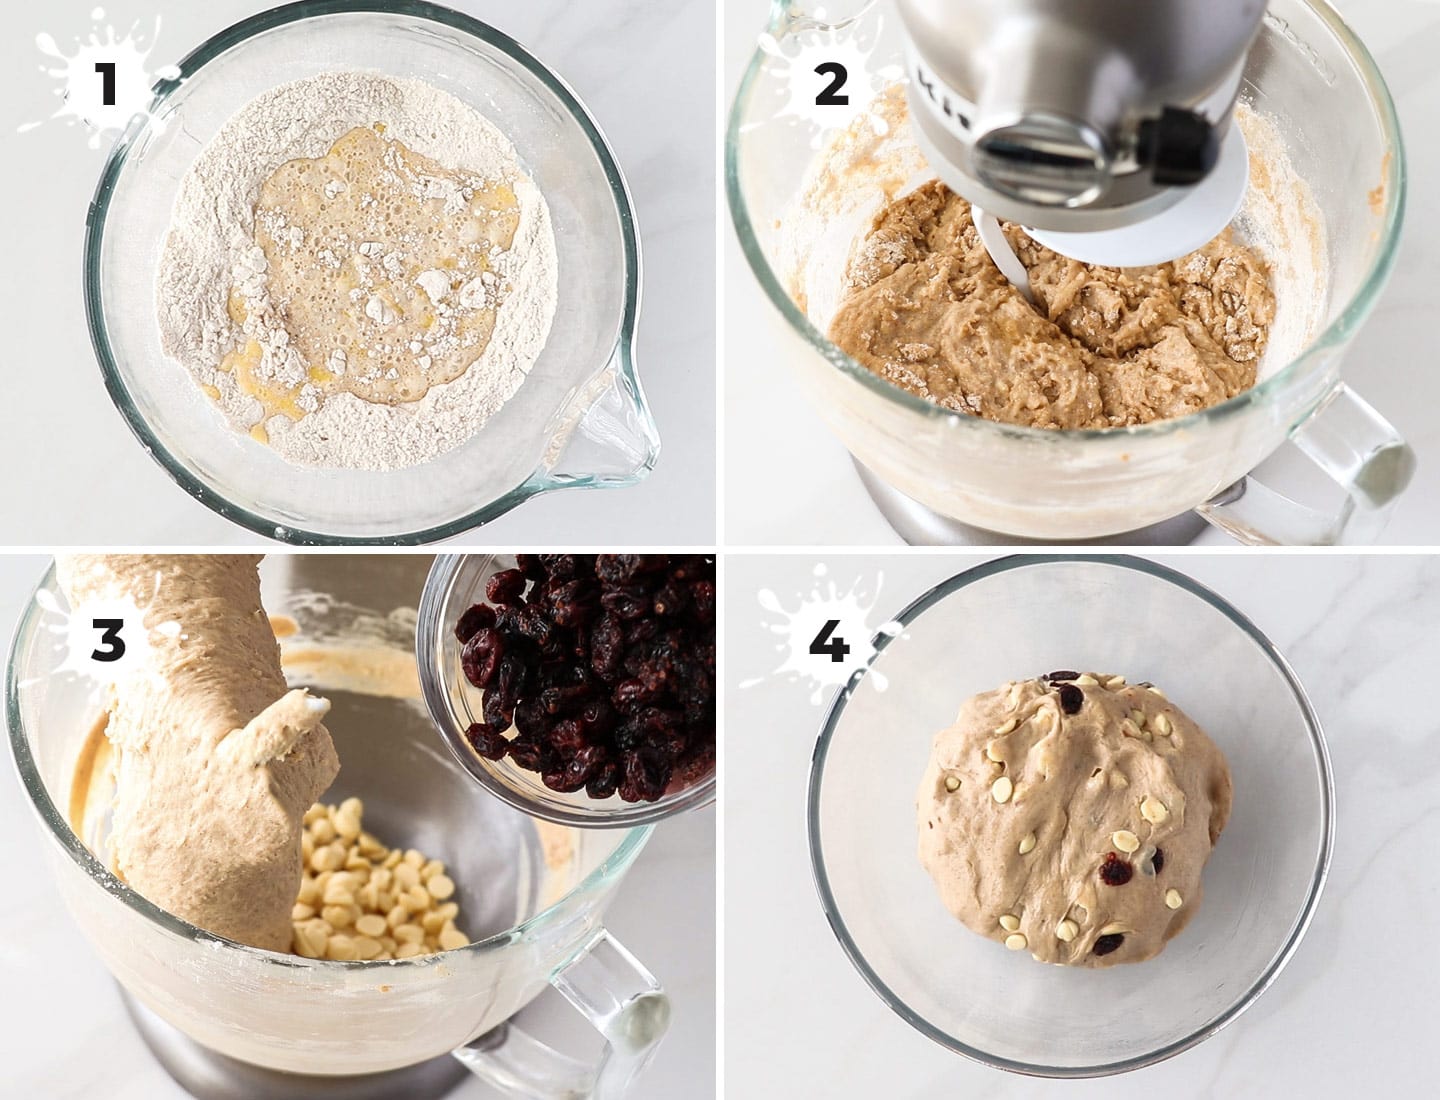 A collage of 4 images showing how to make the hot cross bun dough.